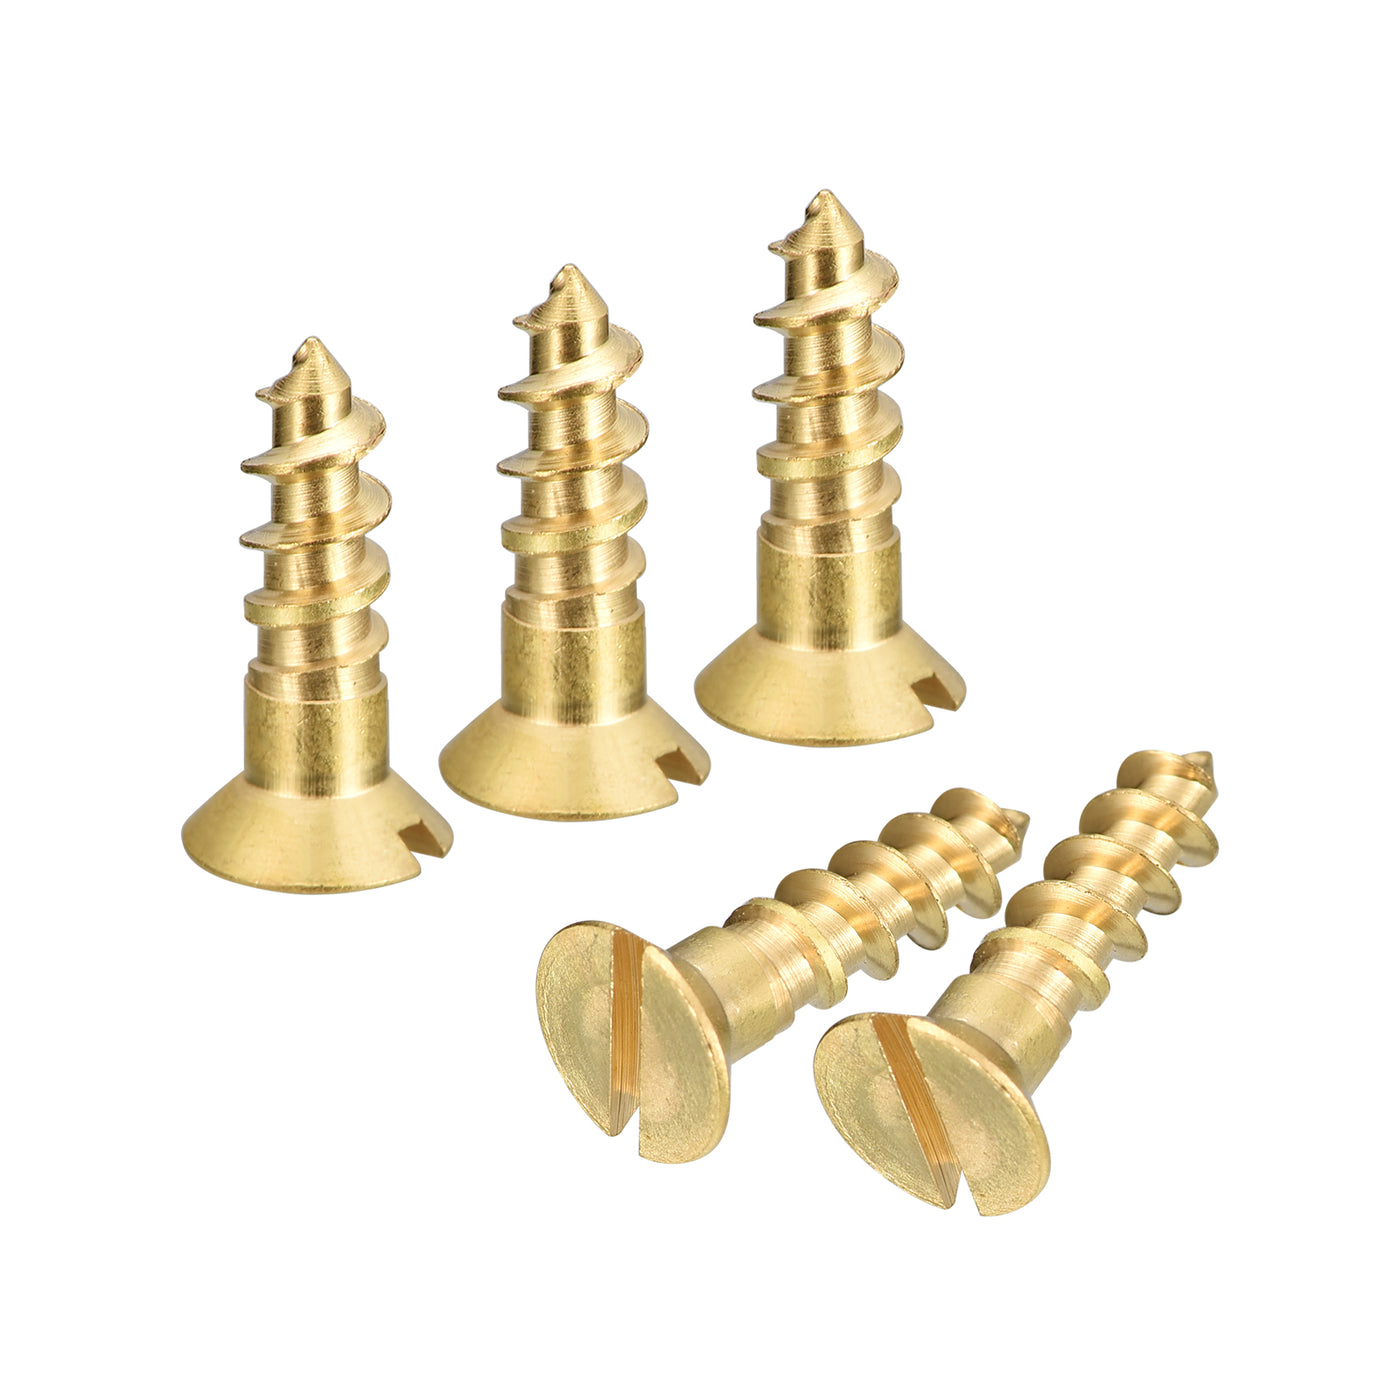 uxcell Uxcell 20Pcs M6 x 20mm Brass Slotted Drive Flat Head Wood Screws Self Tapping Screw